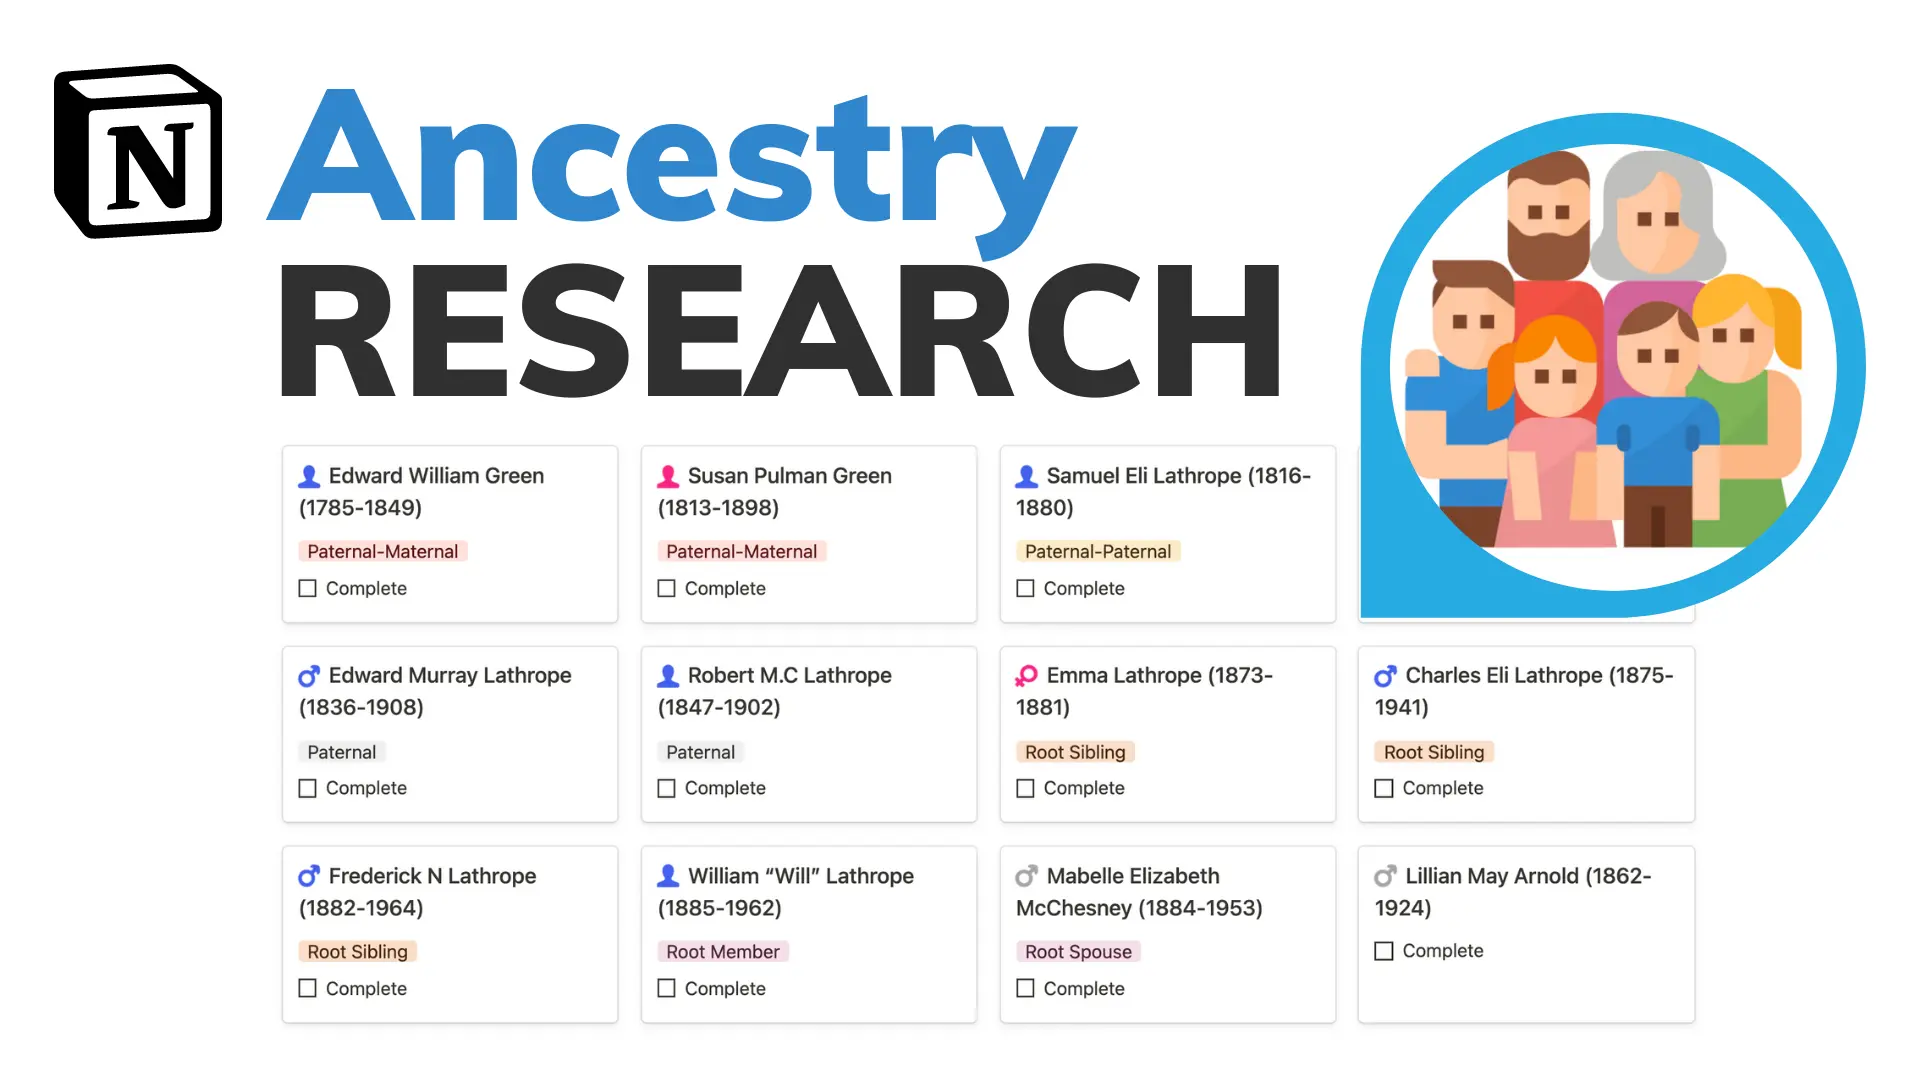 Ancestry Research Wiki For Notion image